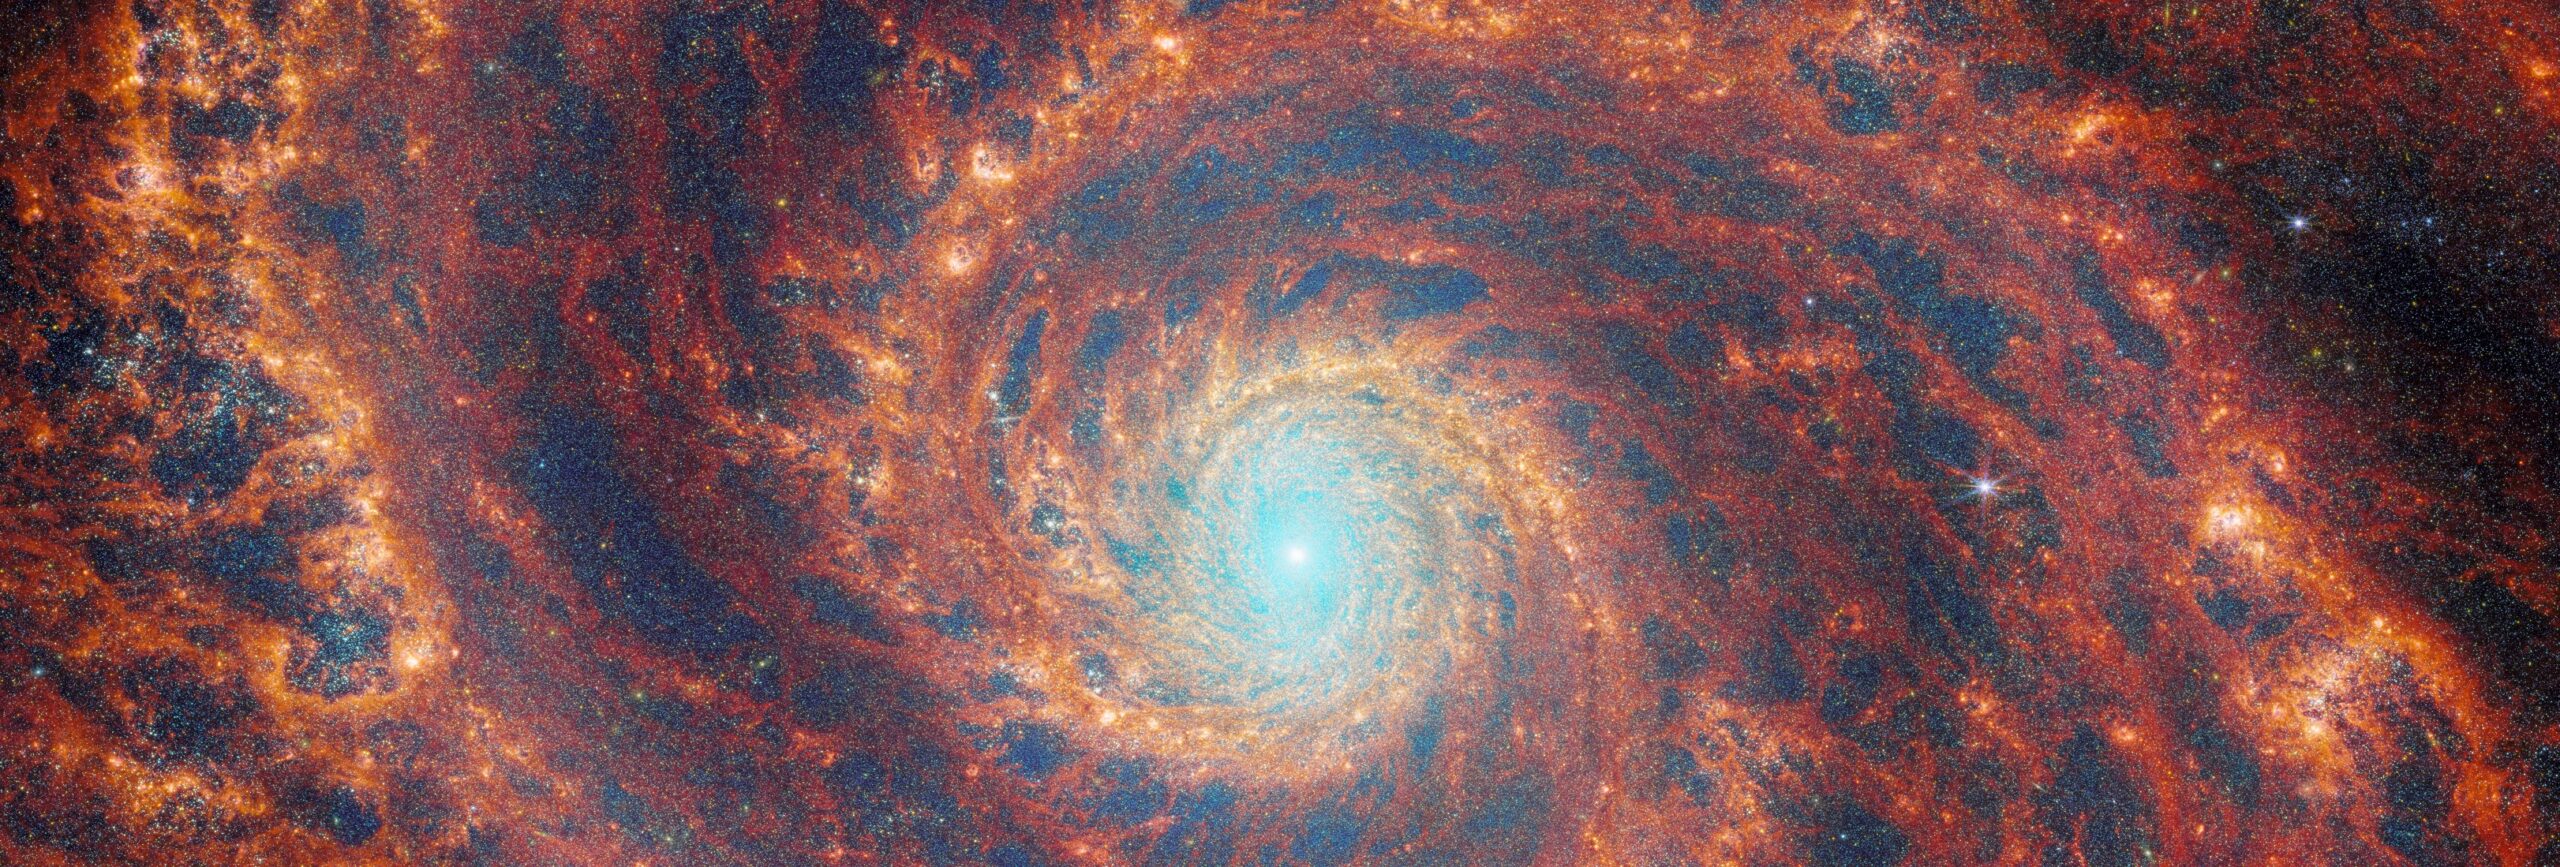 false-color infrared image of galaxy M51 by james webb space telescope